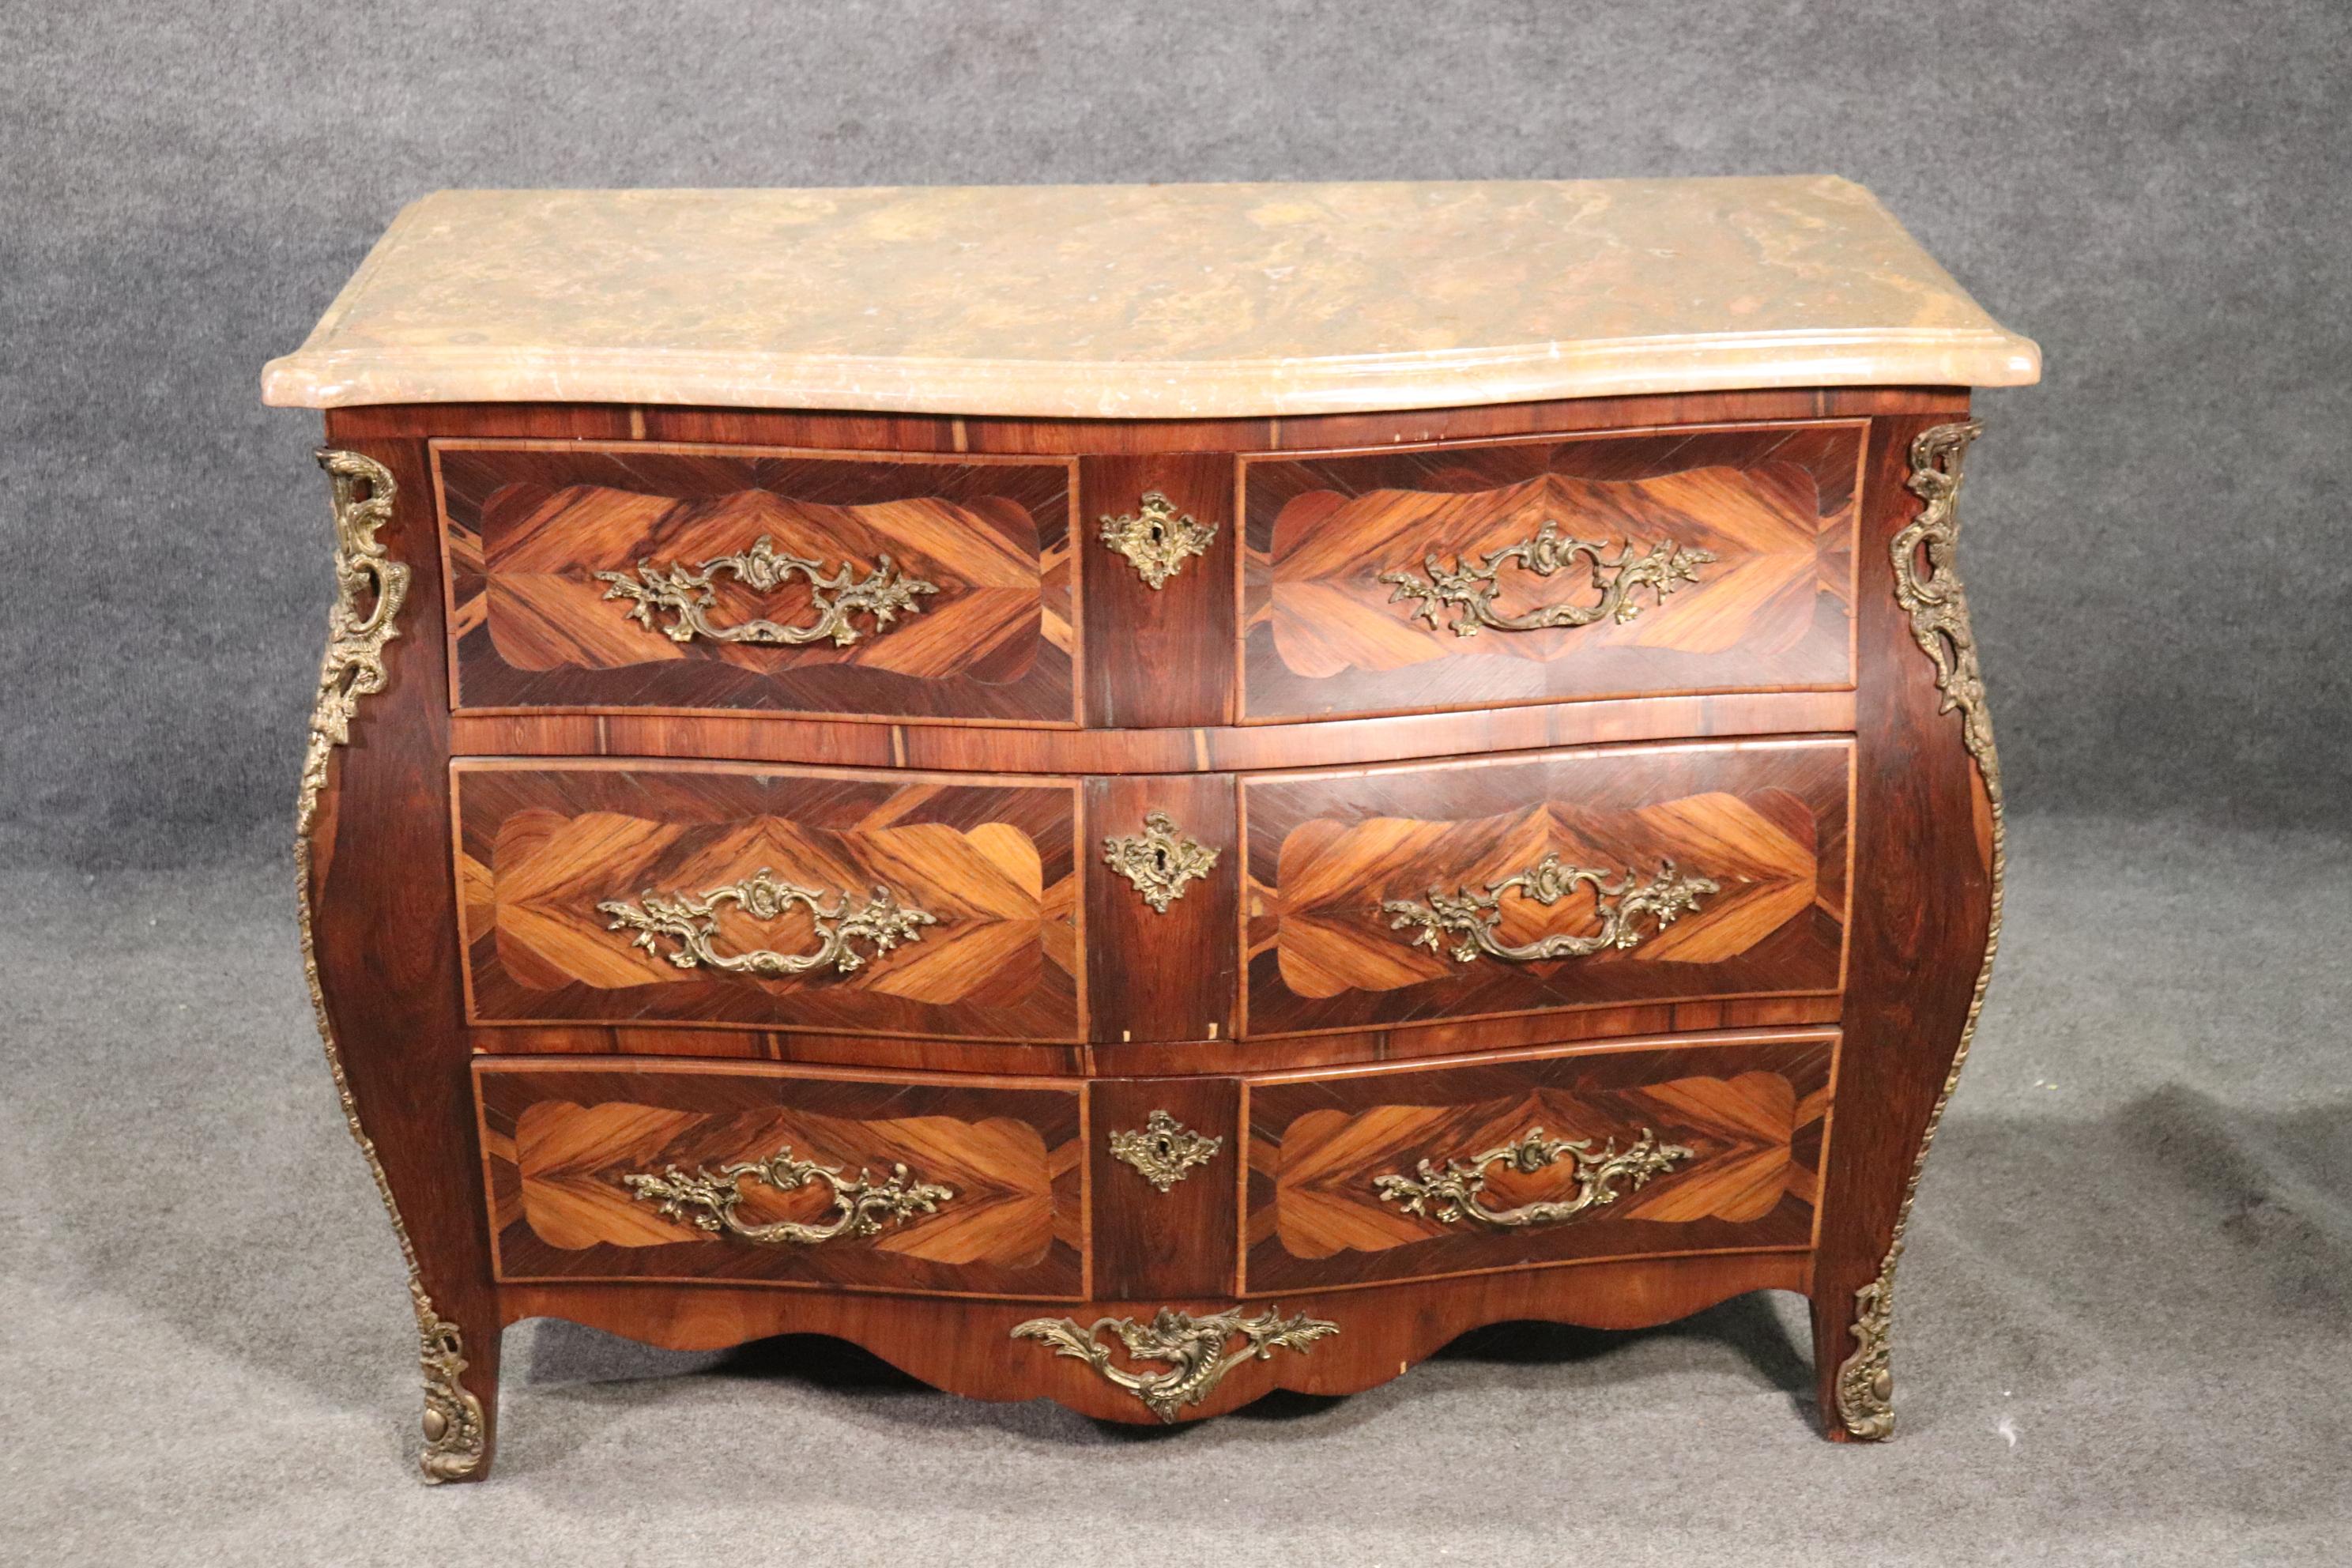 This is a beautifully designed French bombe commode or dresser. The marble top and teh case are in good condition. The piece measures 34 tall x 36 wide x 19 inches deep.